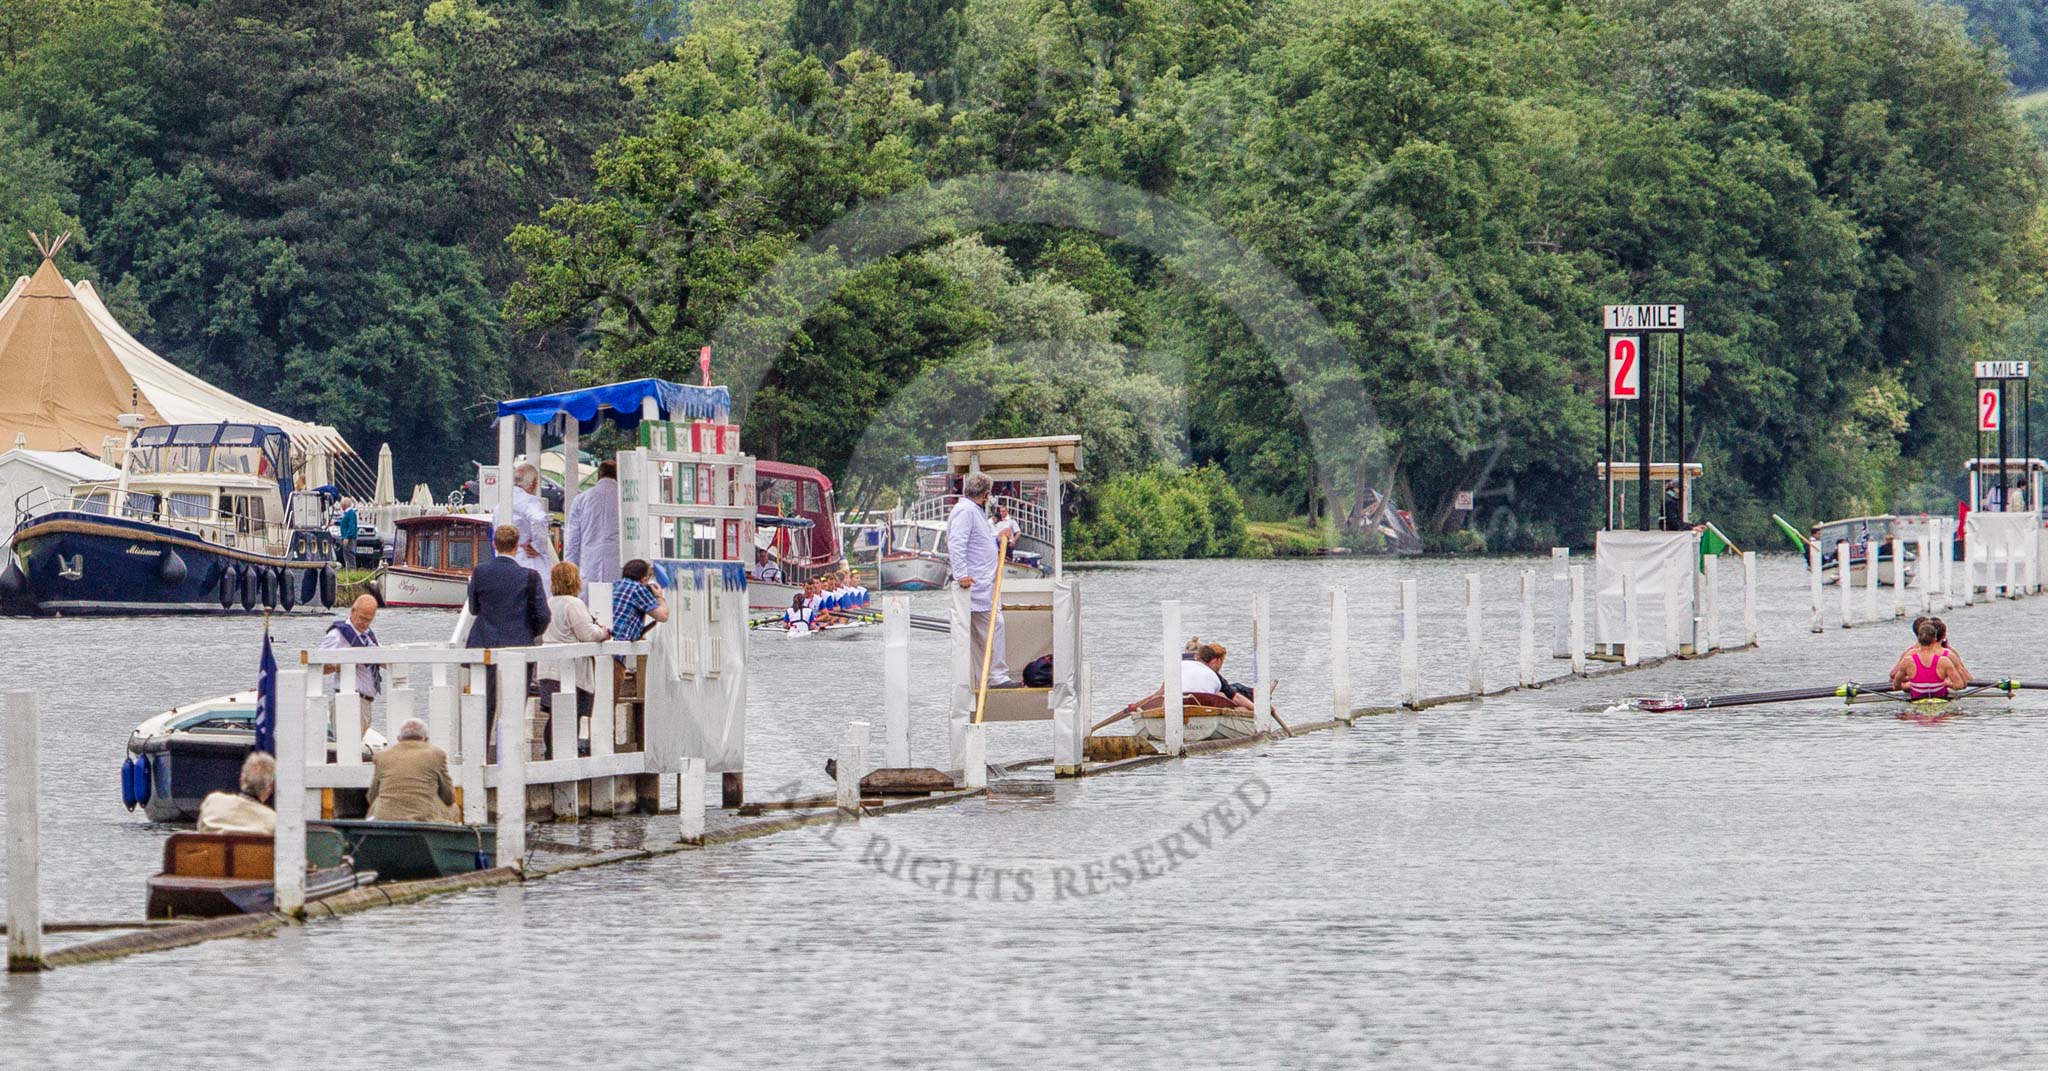 Henley Royal Regatta 2013 (Wednesday): In the middle of the river close to the finish line of the Henley Royal Regatta - the photo box next to the progress board..
River Thames between Henley and Temple Island,
Henley-on-Thames,
Berkshire,
United Kingdom,
on 03 July 2013 at 09:36, image #14